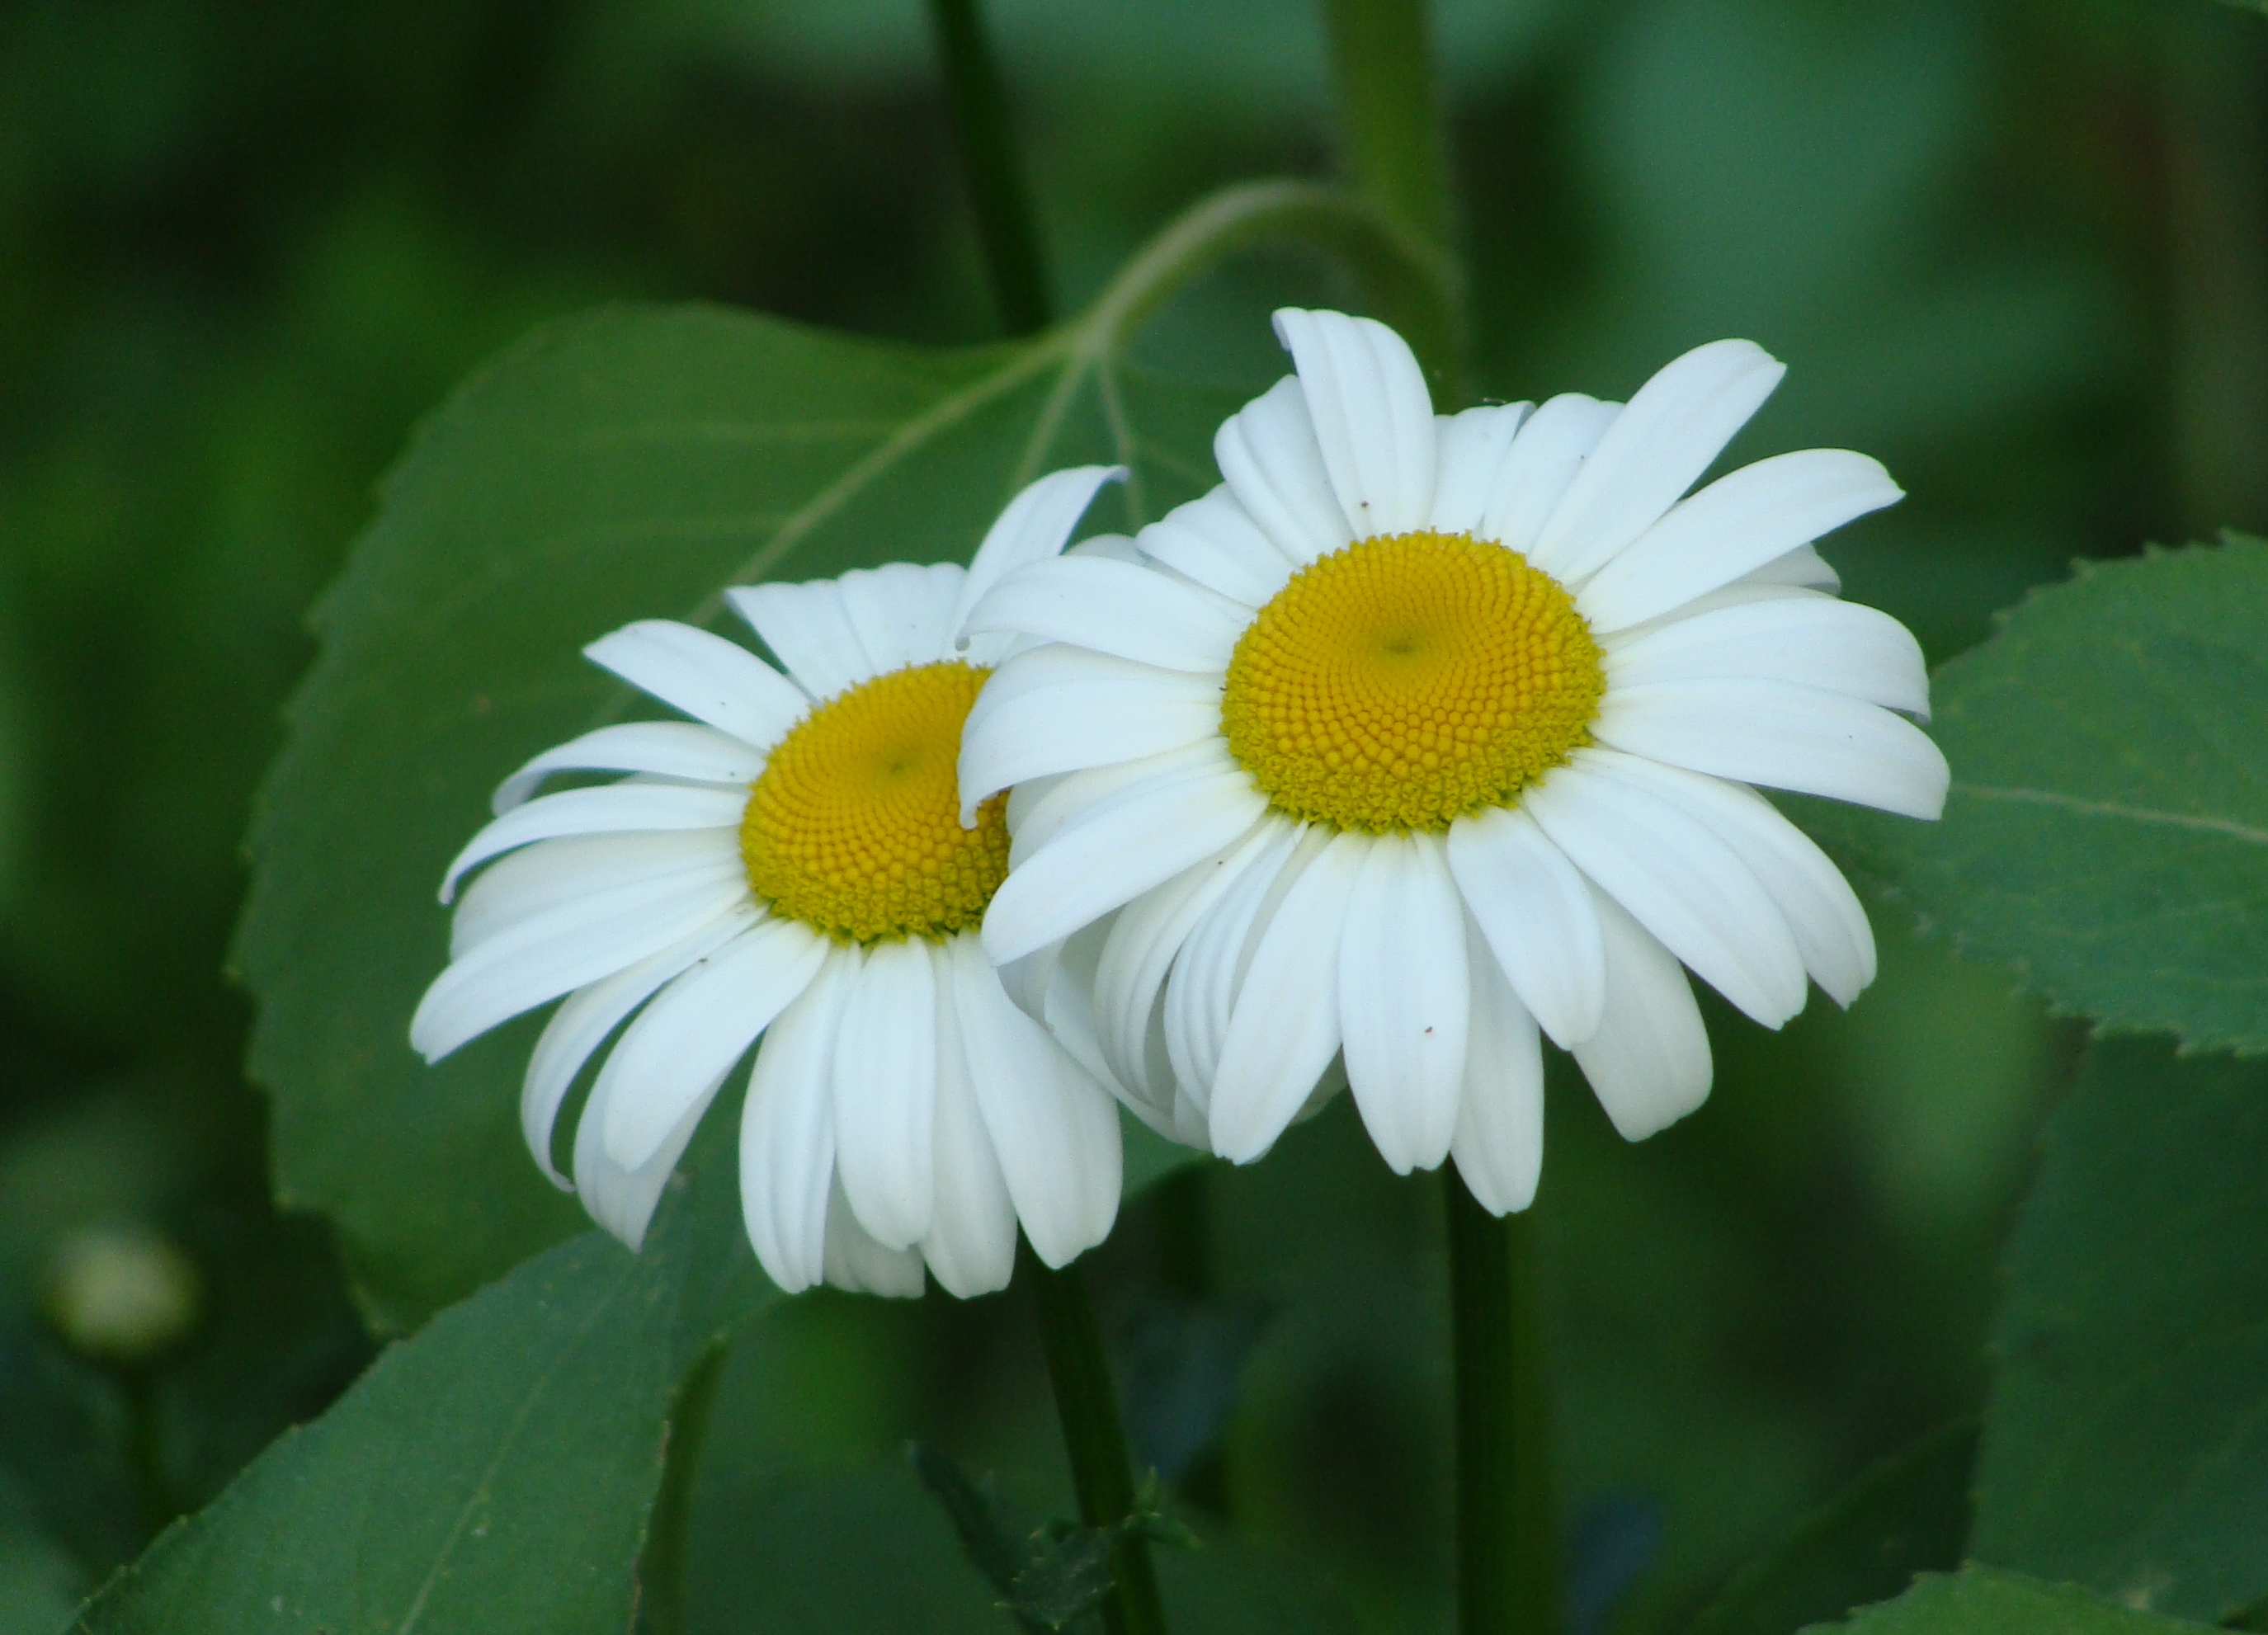 May 30, 2014 – Daisies and Clover – In Jim's Garden